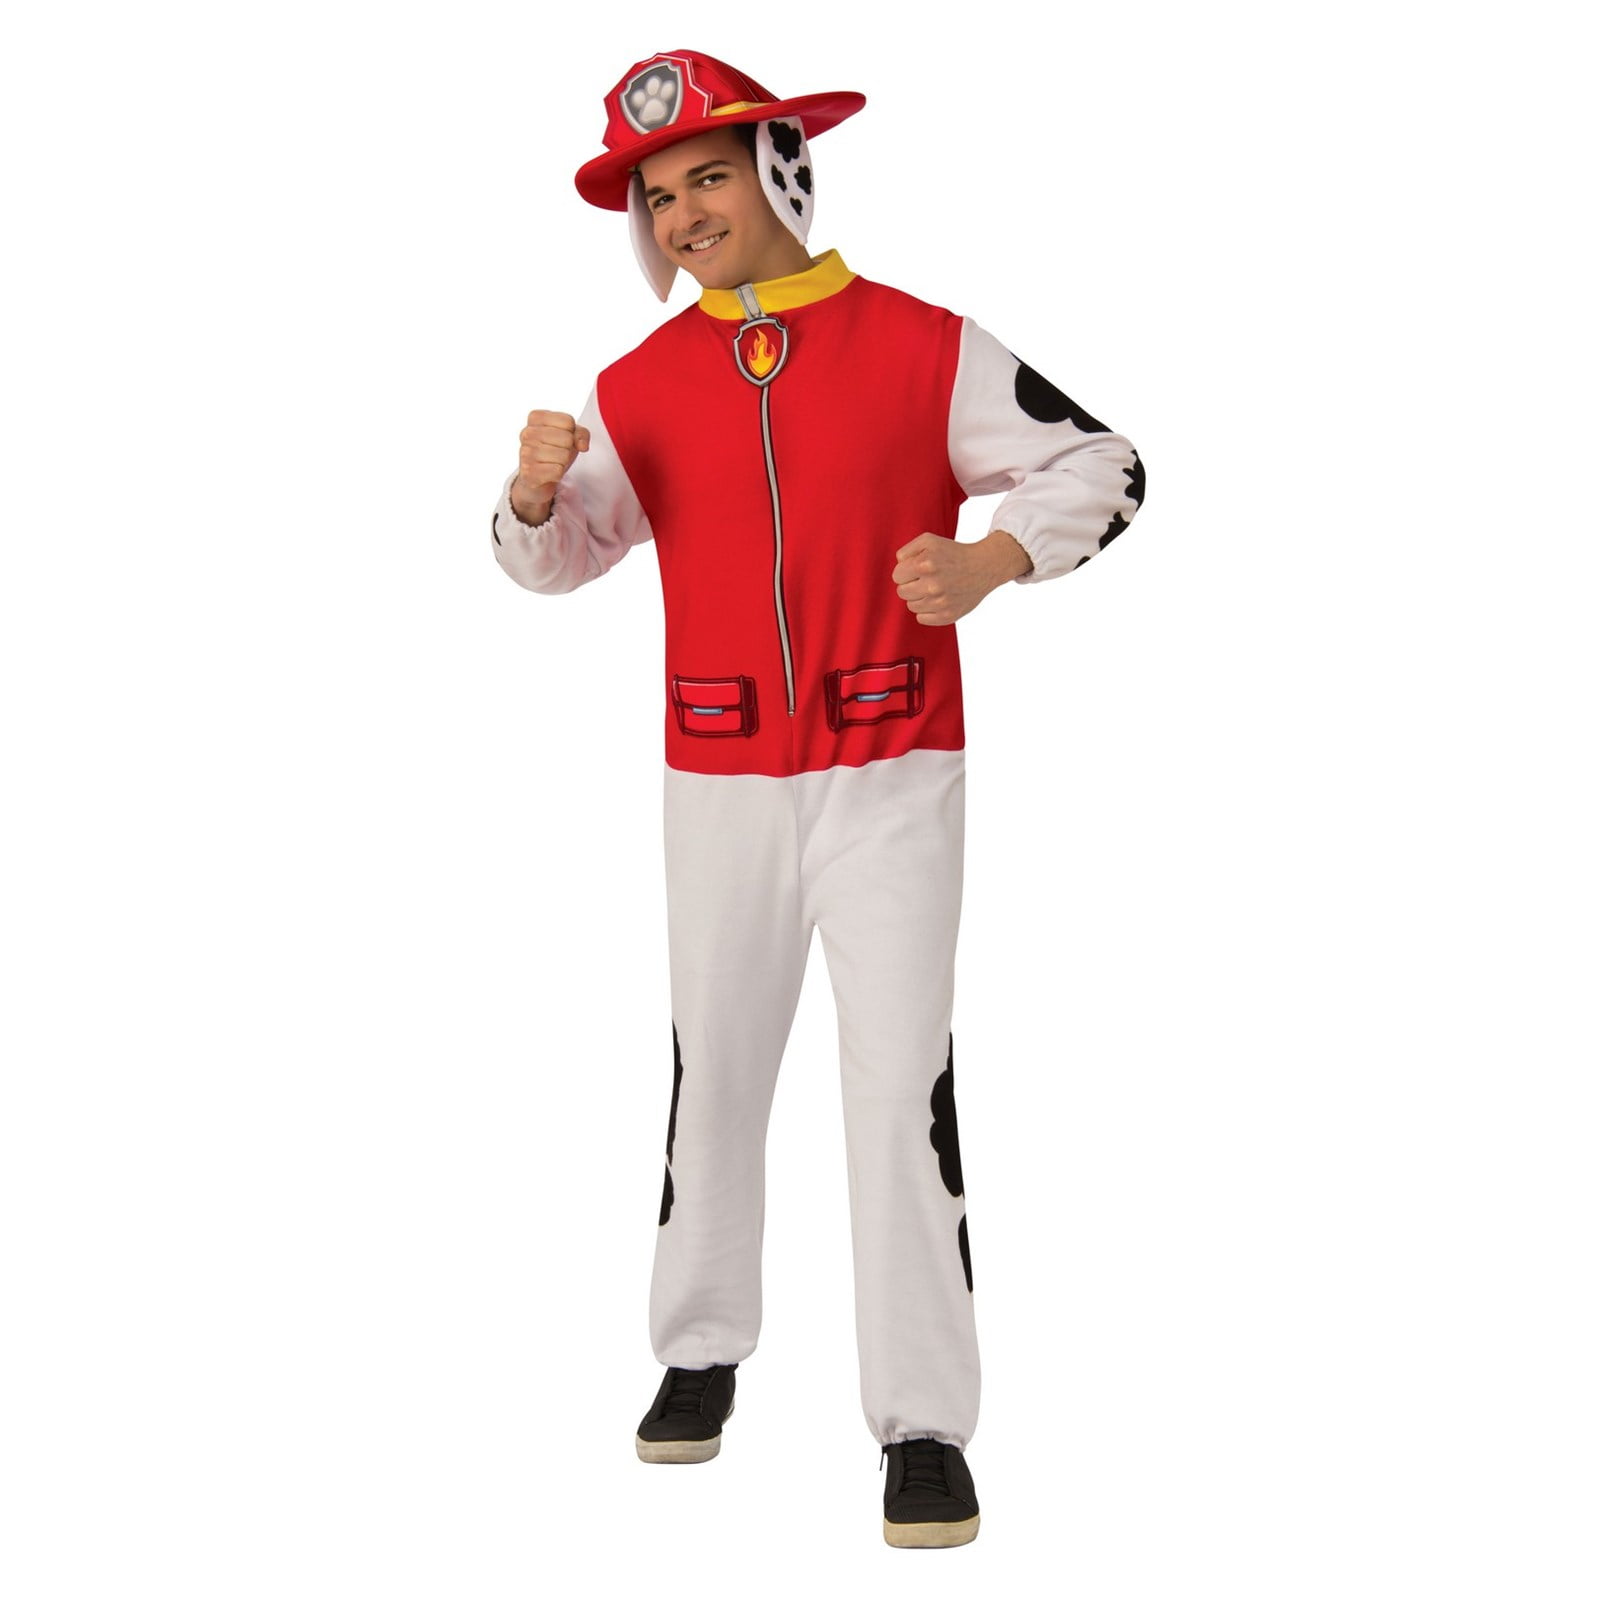 Men's Paw Patrol Marshall Jumpsuit Costume by Rubie's - One Size